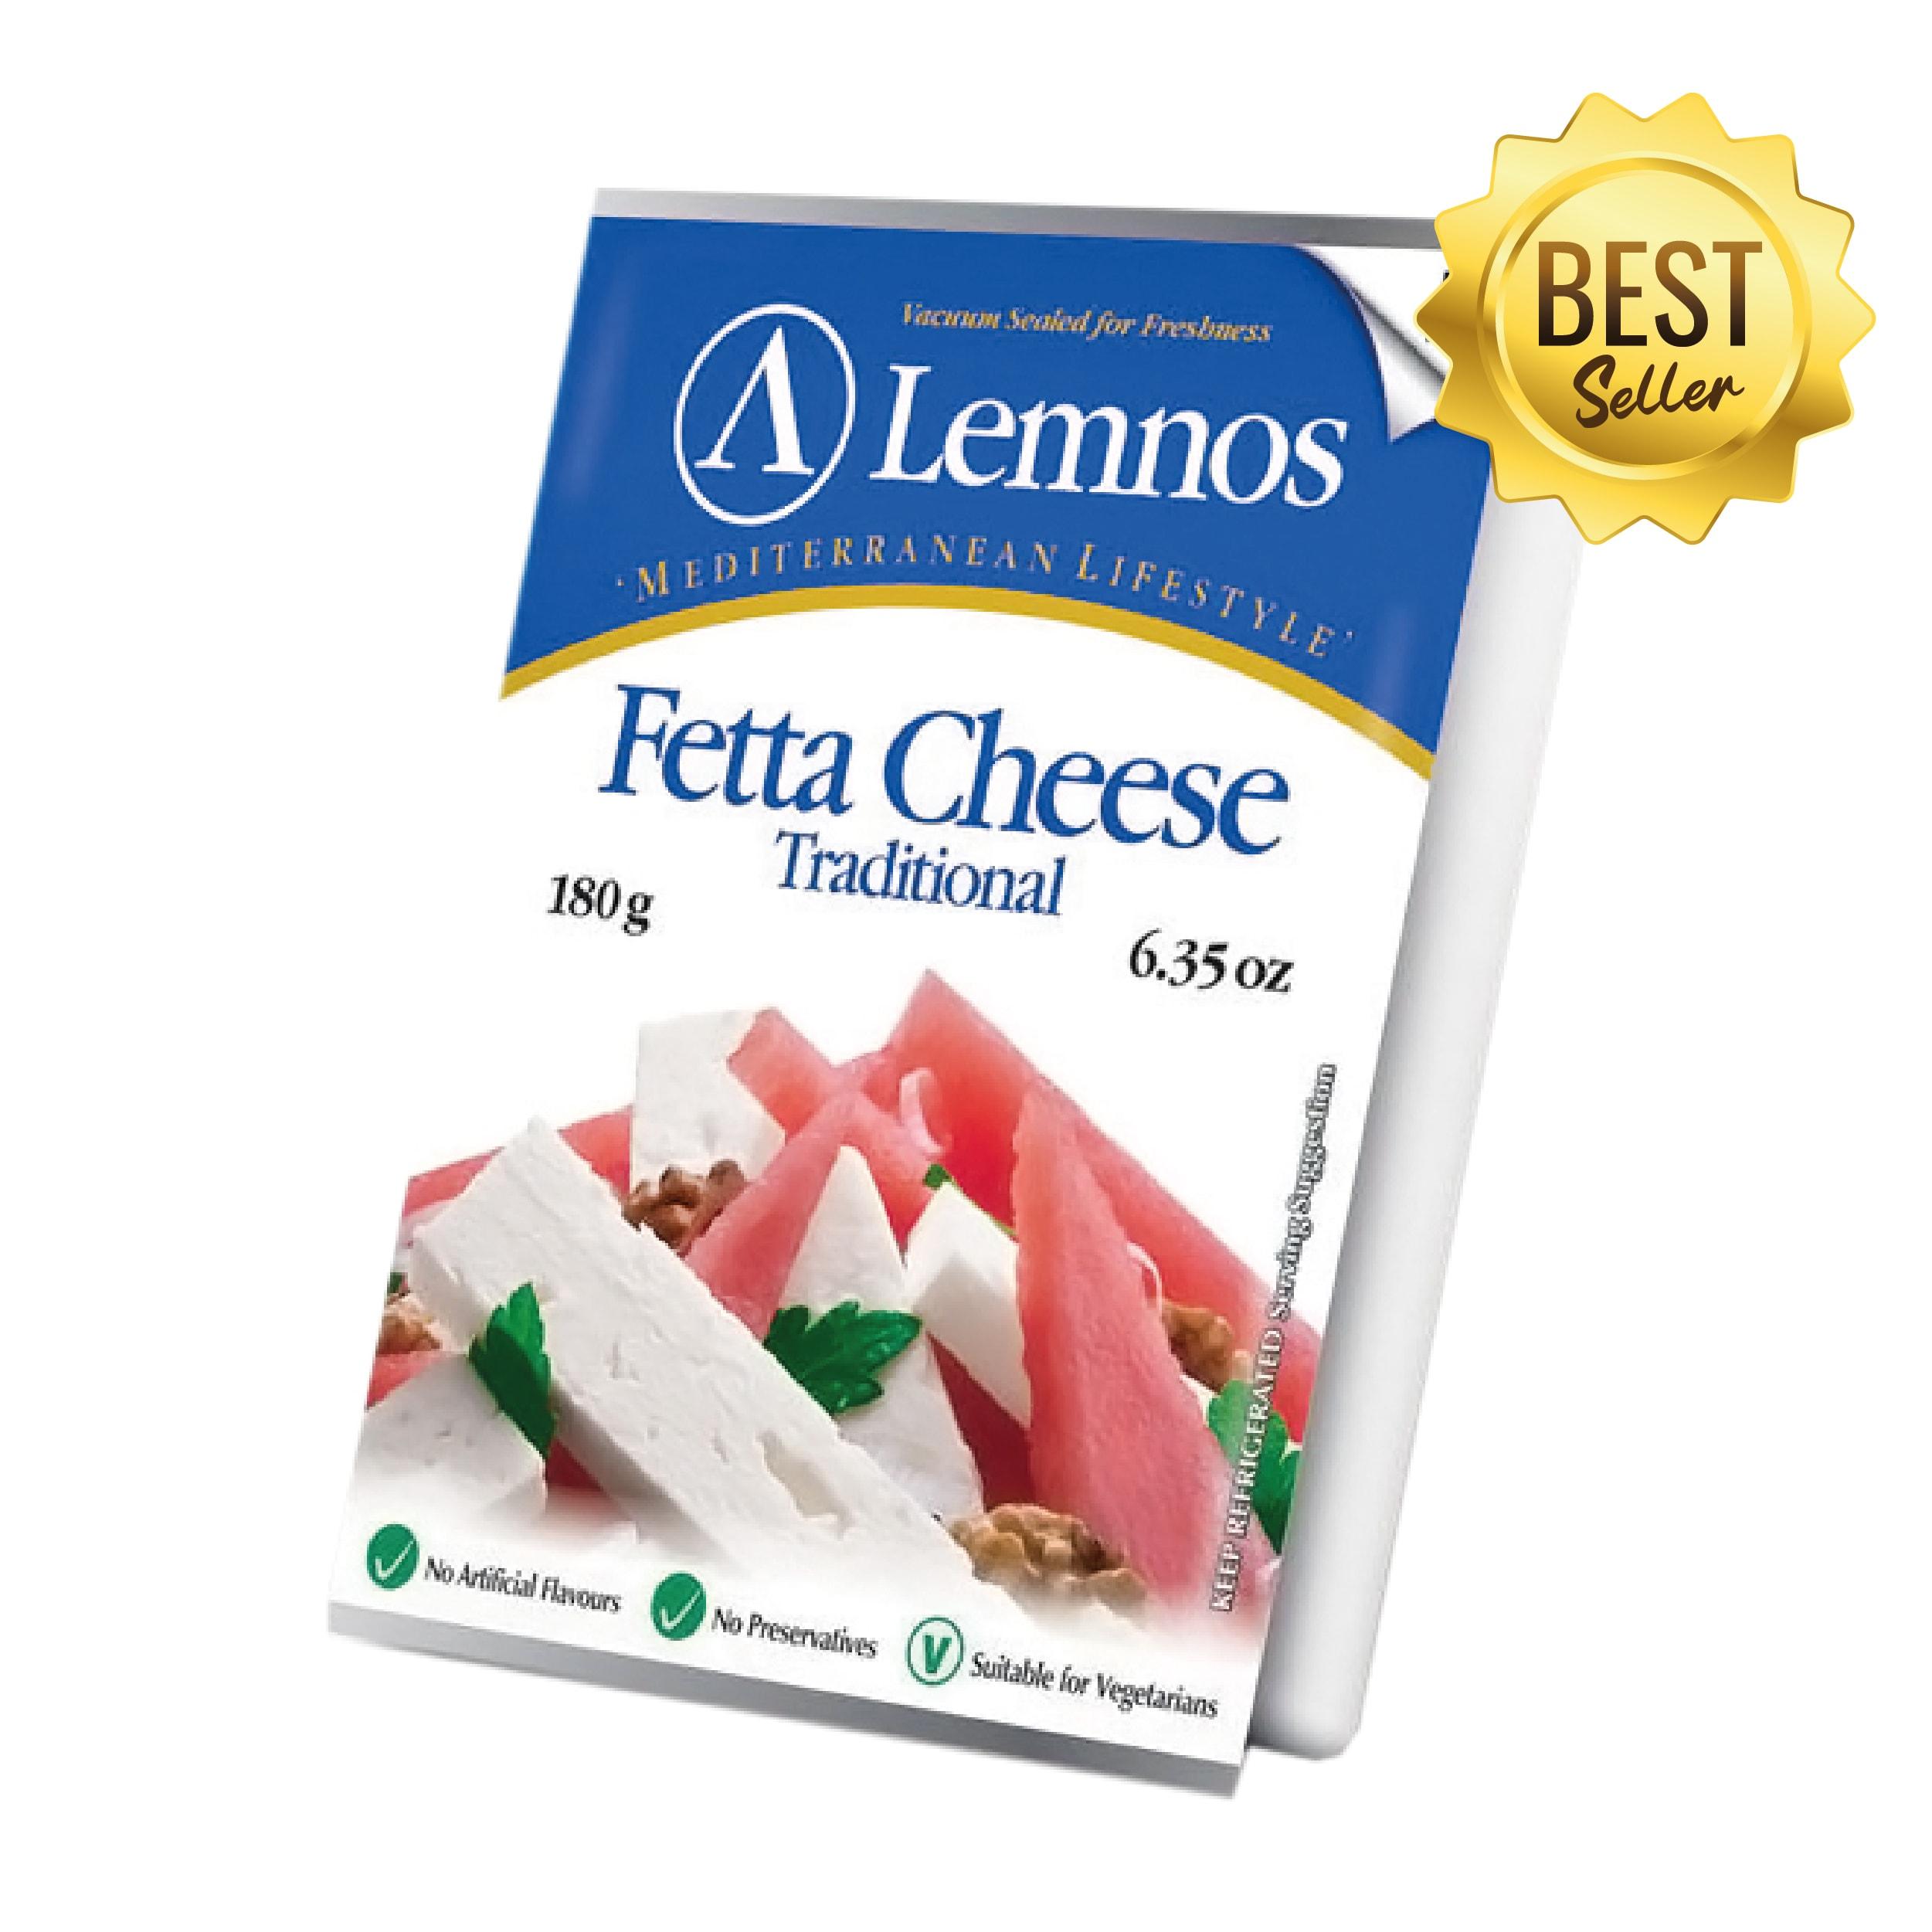 Product Lemnos Fetta Cheese 180g x 12 - globalfoodproduct.com image